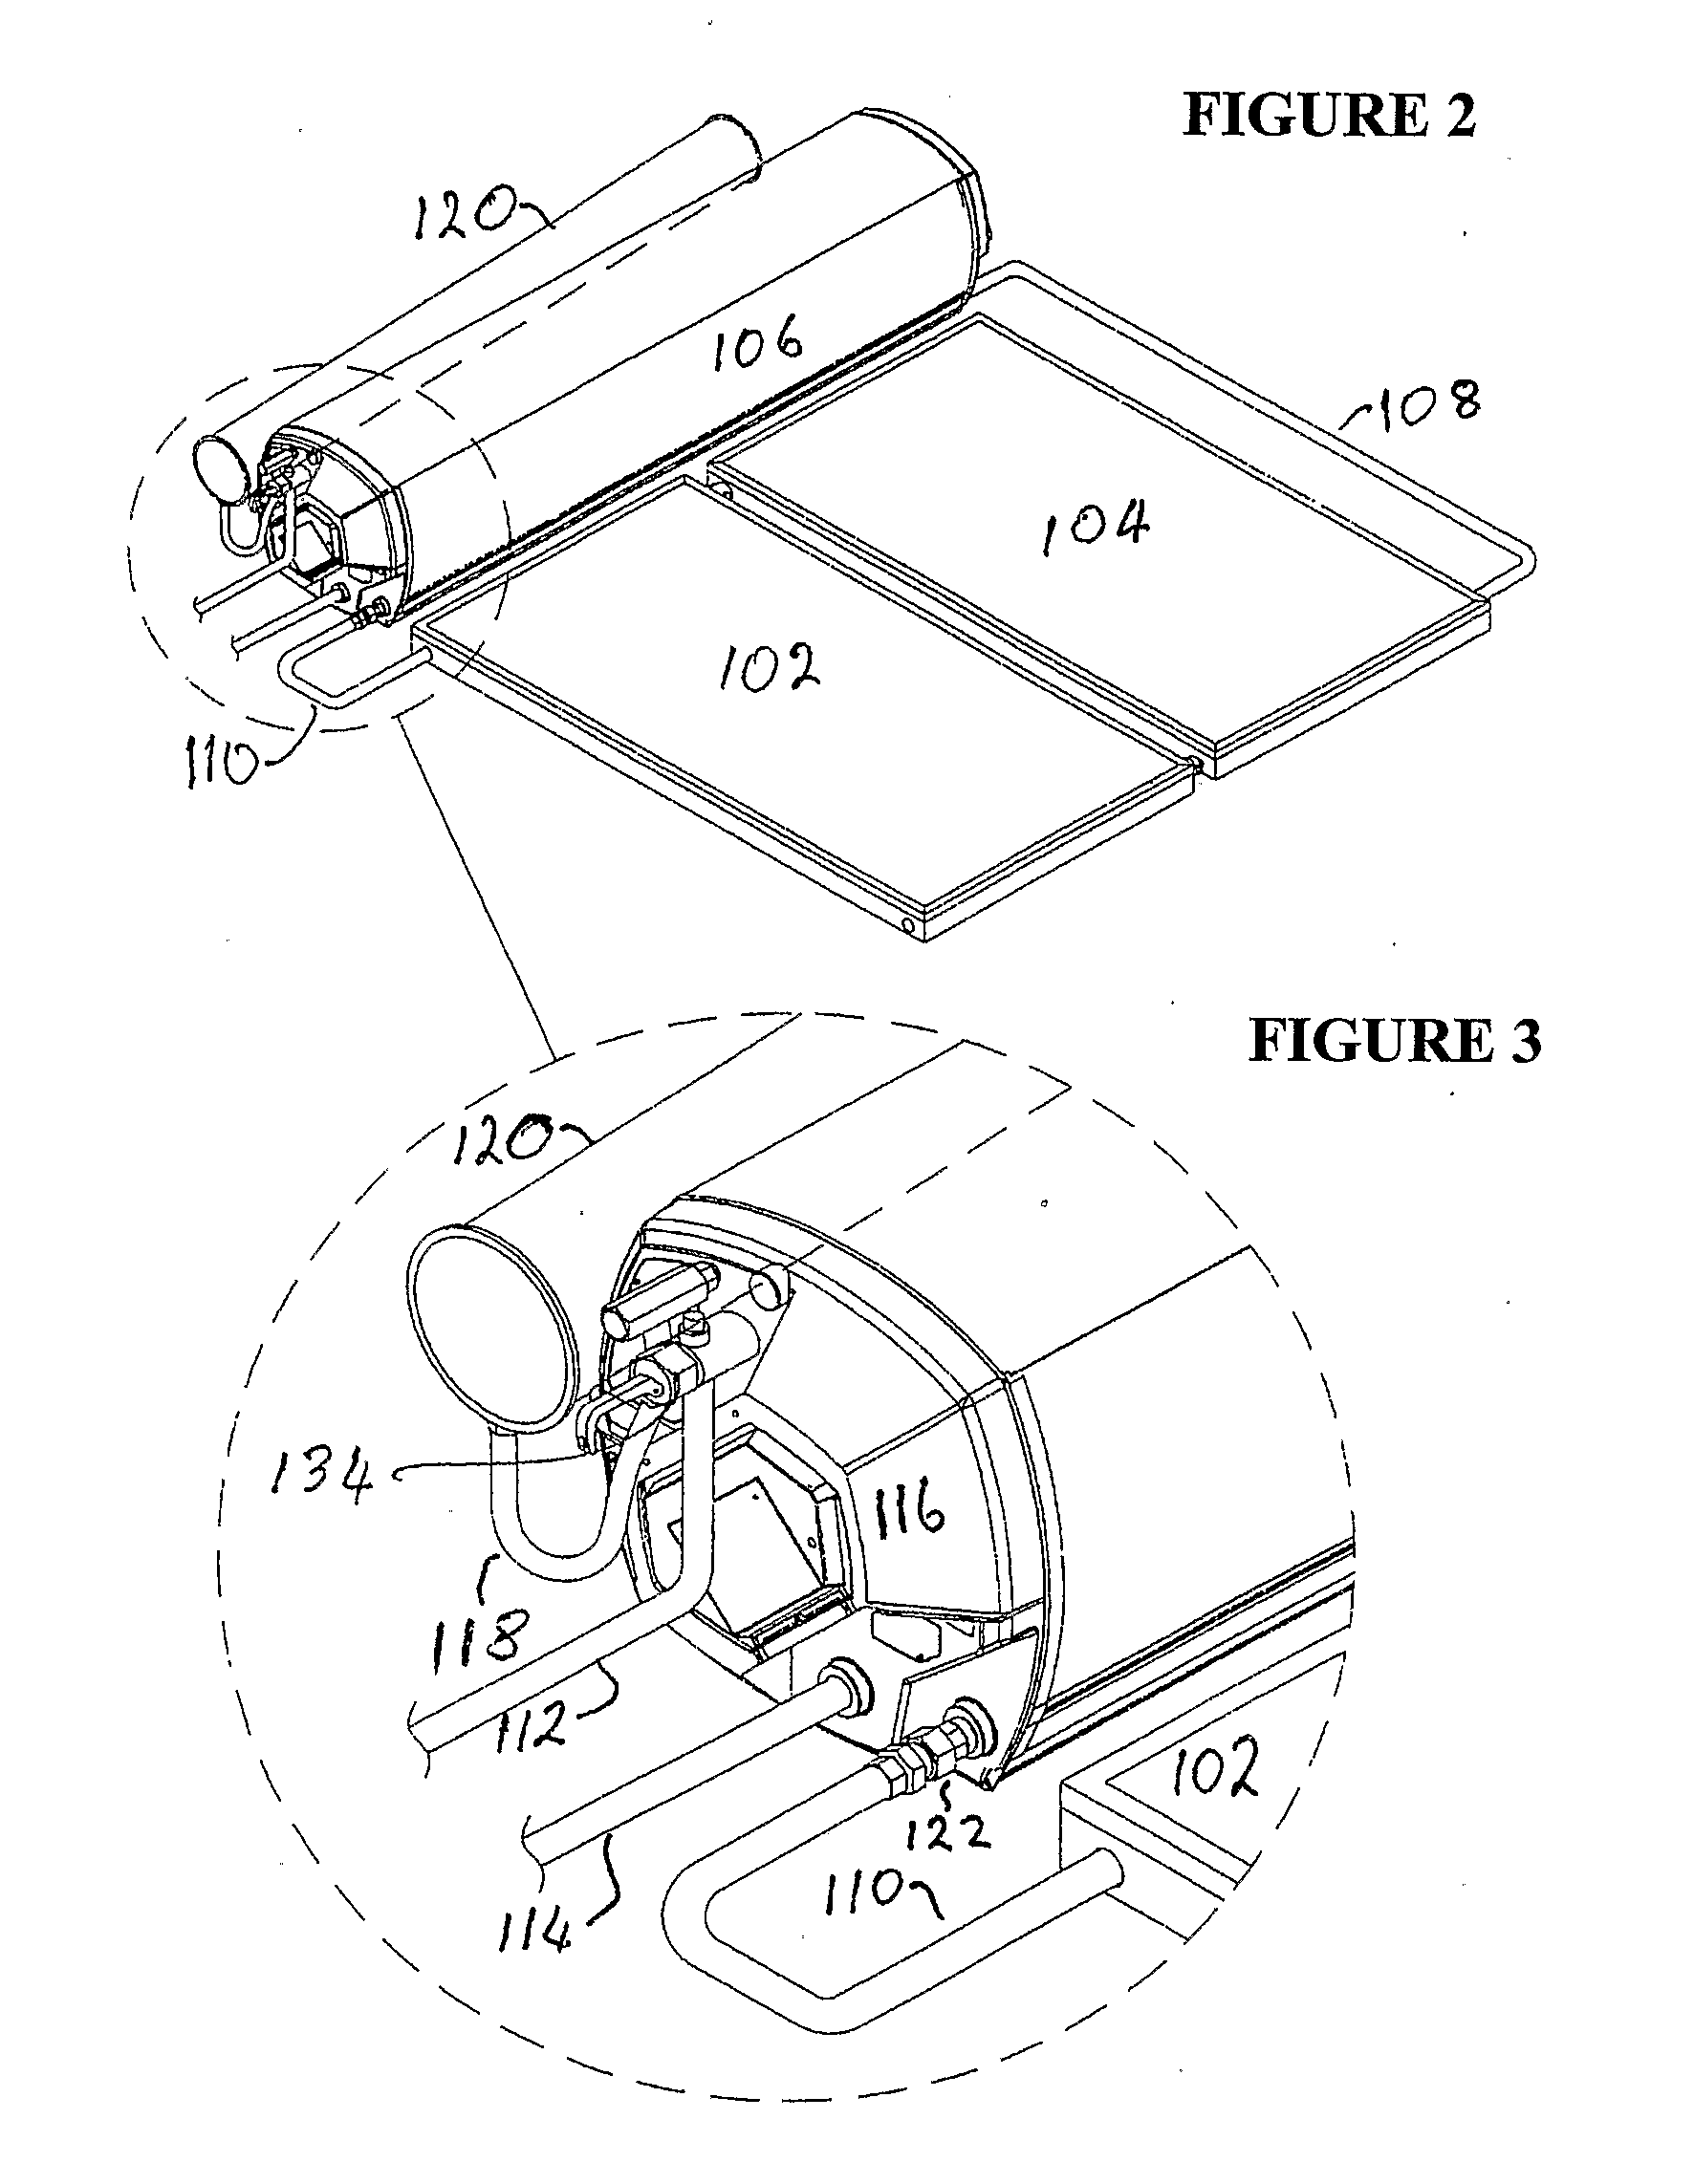 Overtemperature protection system for a solar water heating system